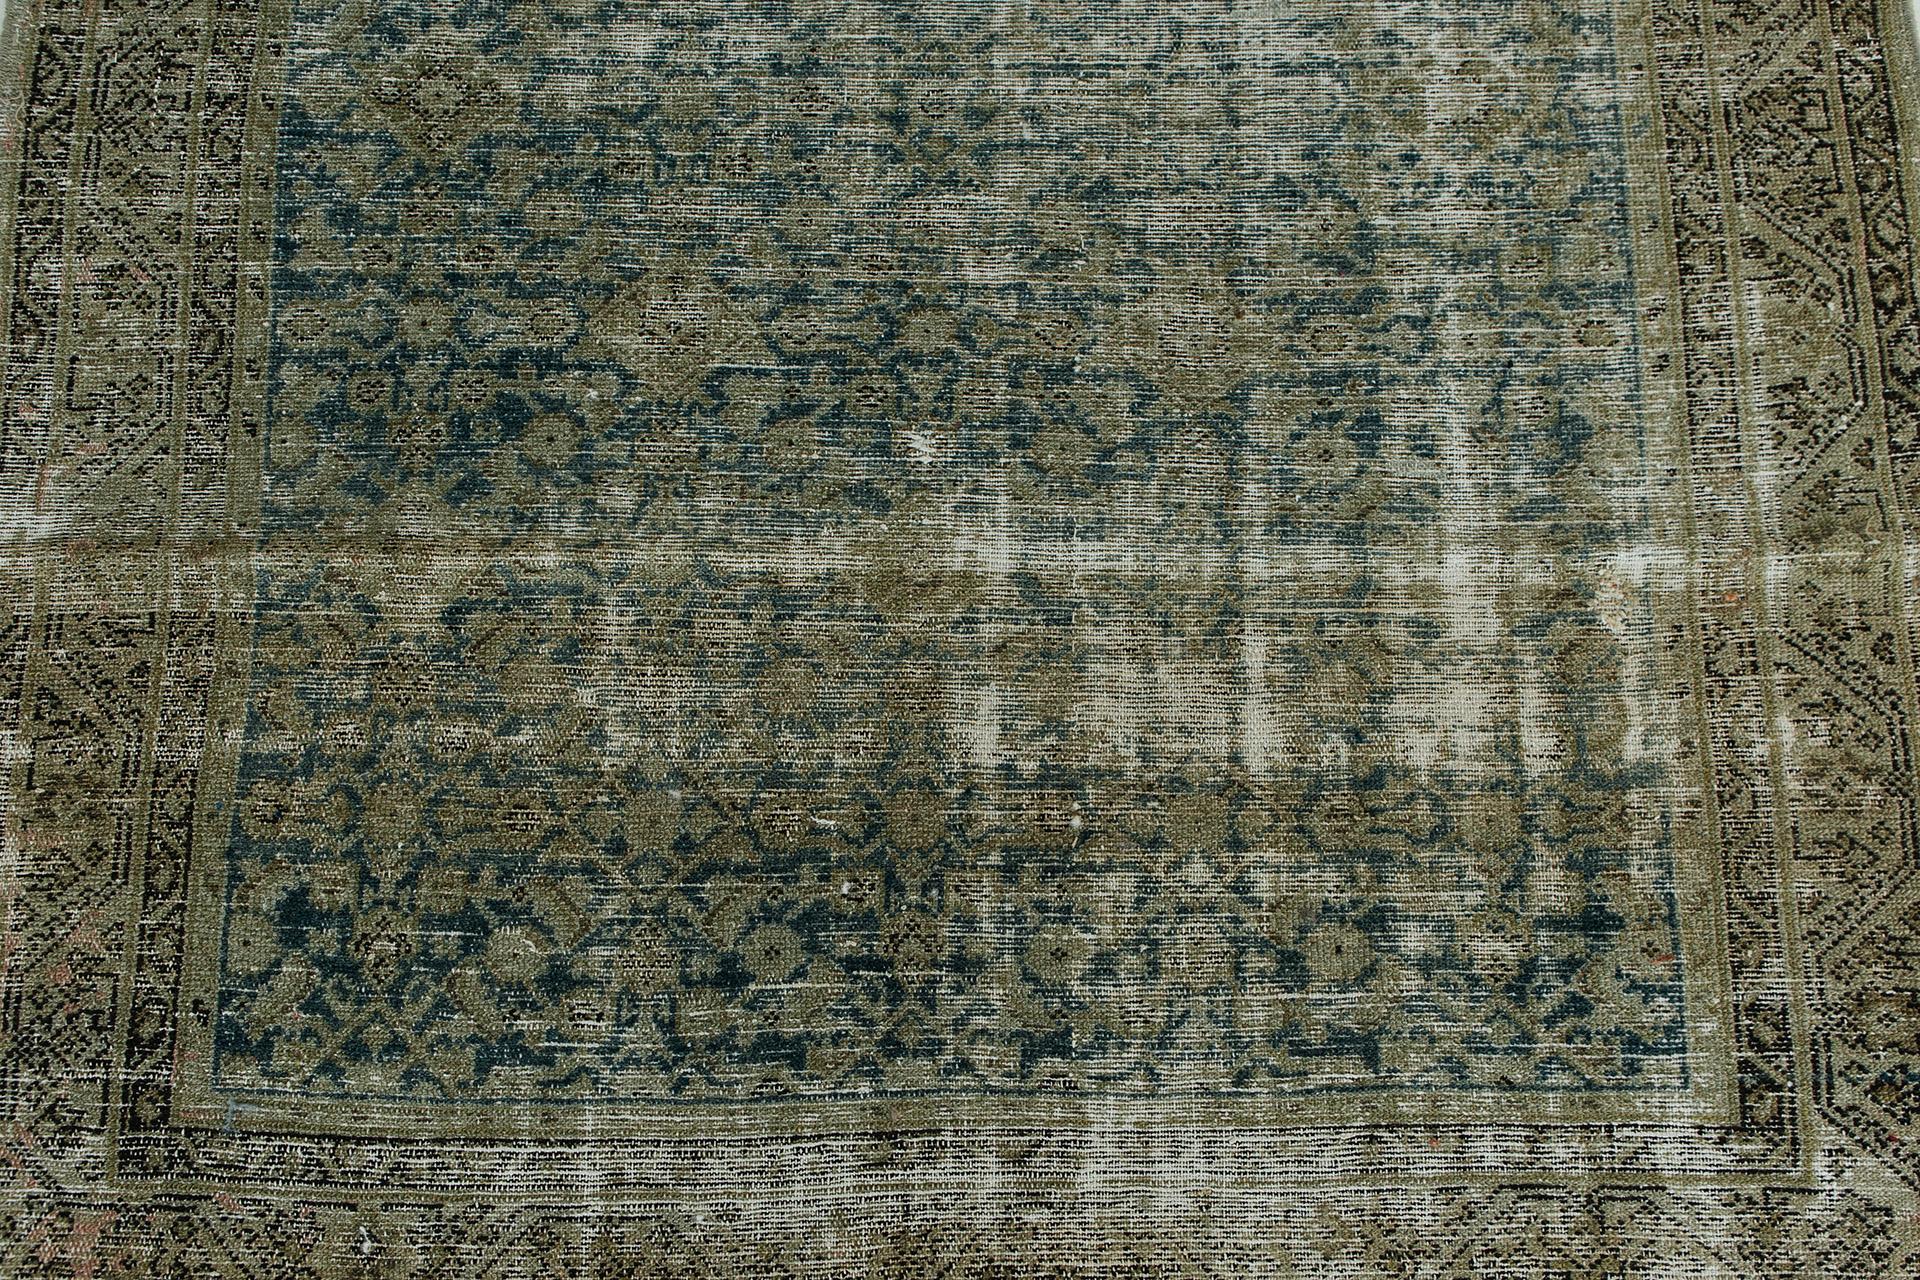 Mottled with wear, this antique Malayer has a rugged appeal with deep teal abrash field and rich, olivey taupe throughout. An all-over mina khani pattern of florets and diamond lattice emerges through the foundation. Borders of meander motifs frame